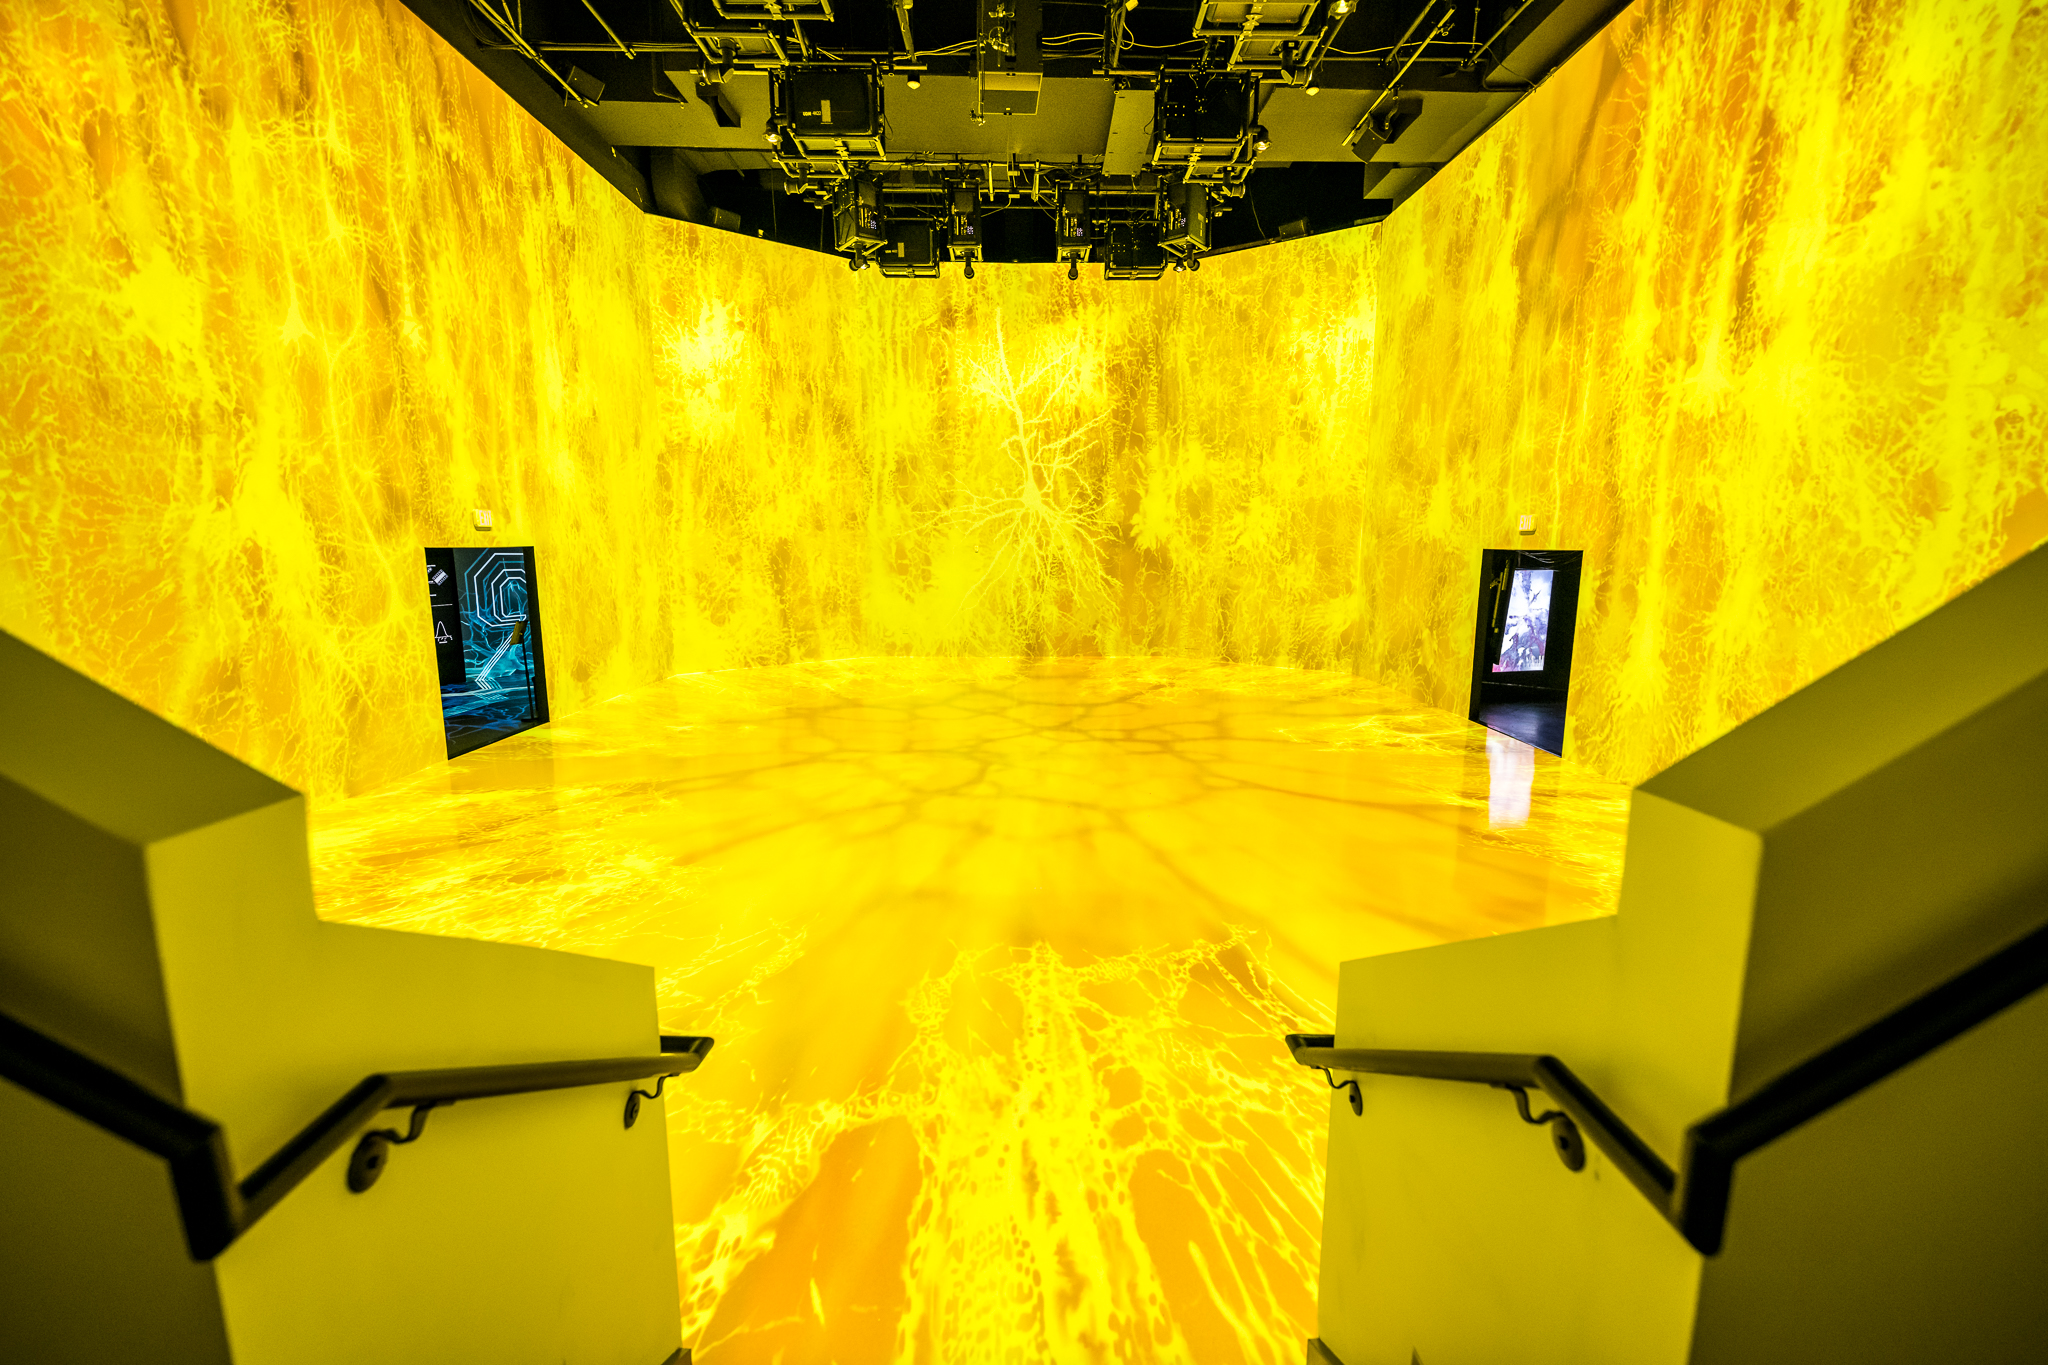 Image of the main display of the ARTECHOUSE life of a neuron exhibit from the entrance stairway.